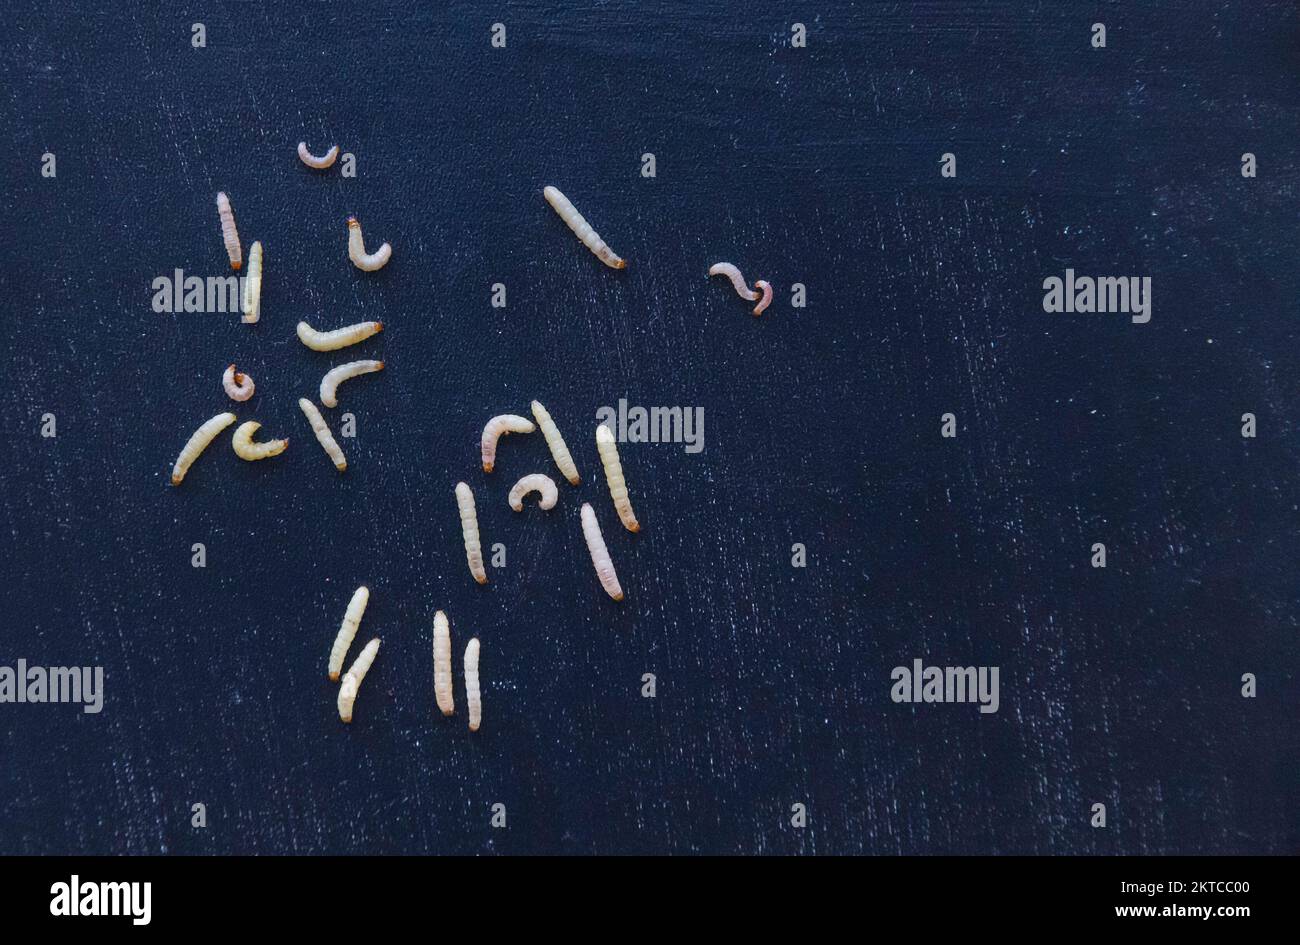 Worms on a black background. Place for text Stock Photo